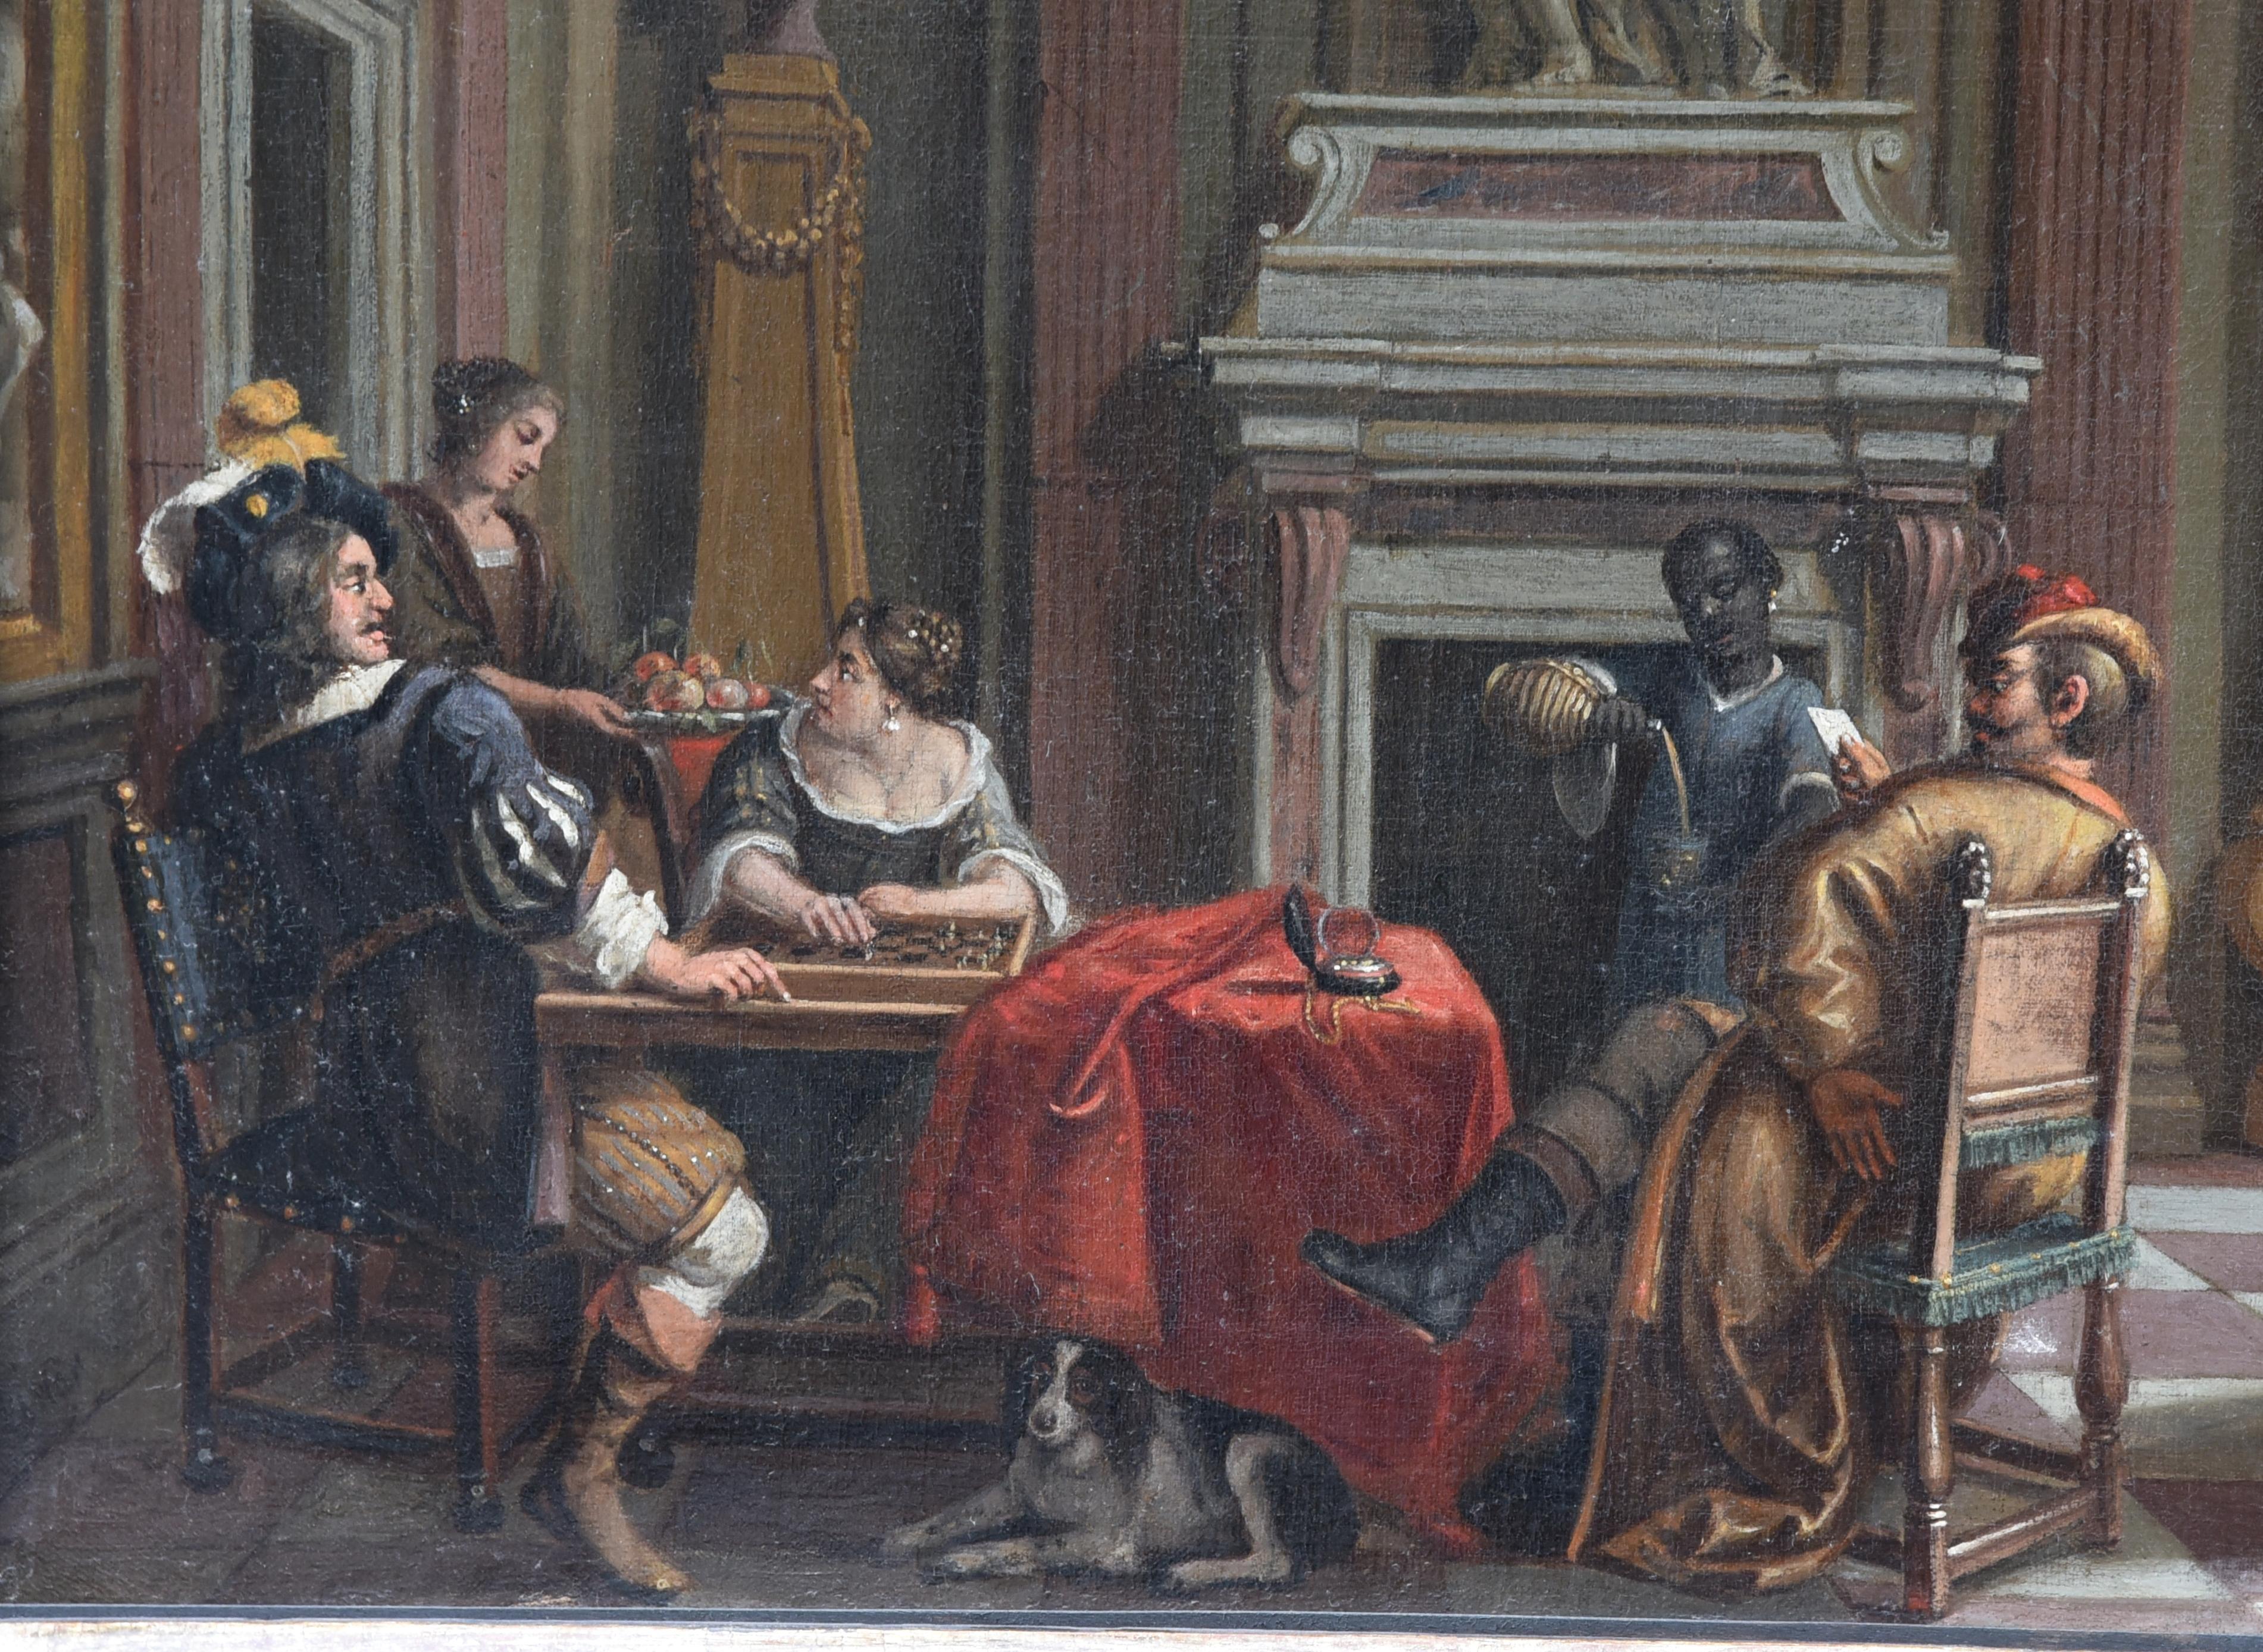 17th Century Painting, Oil on Canvas depicting Palace interior In Tuscany with figures, Signed lower left by Dirck Van Dellen 1604-1671. The frame is from the 1700s.

This object is subject to the superintendence of the fine arts, therefore it must